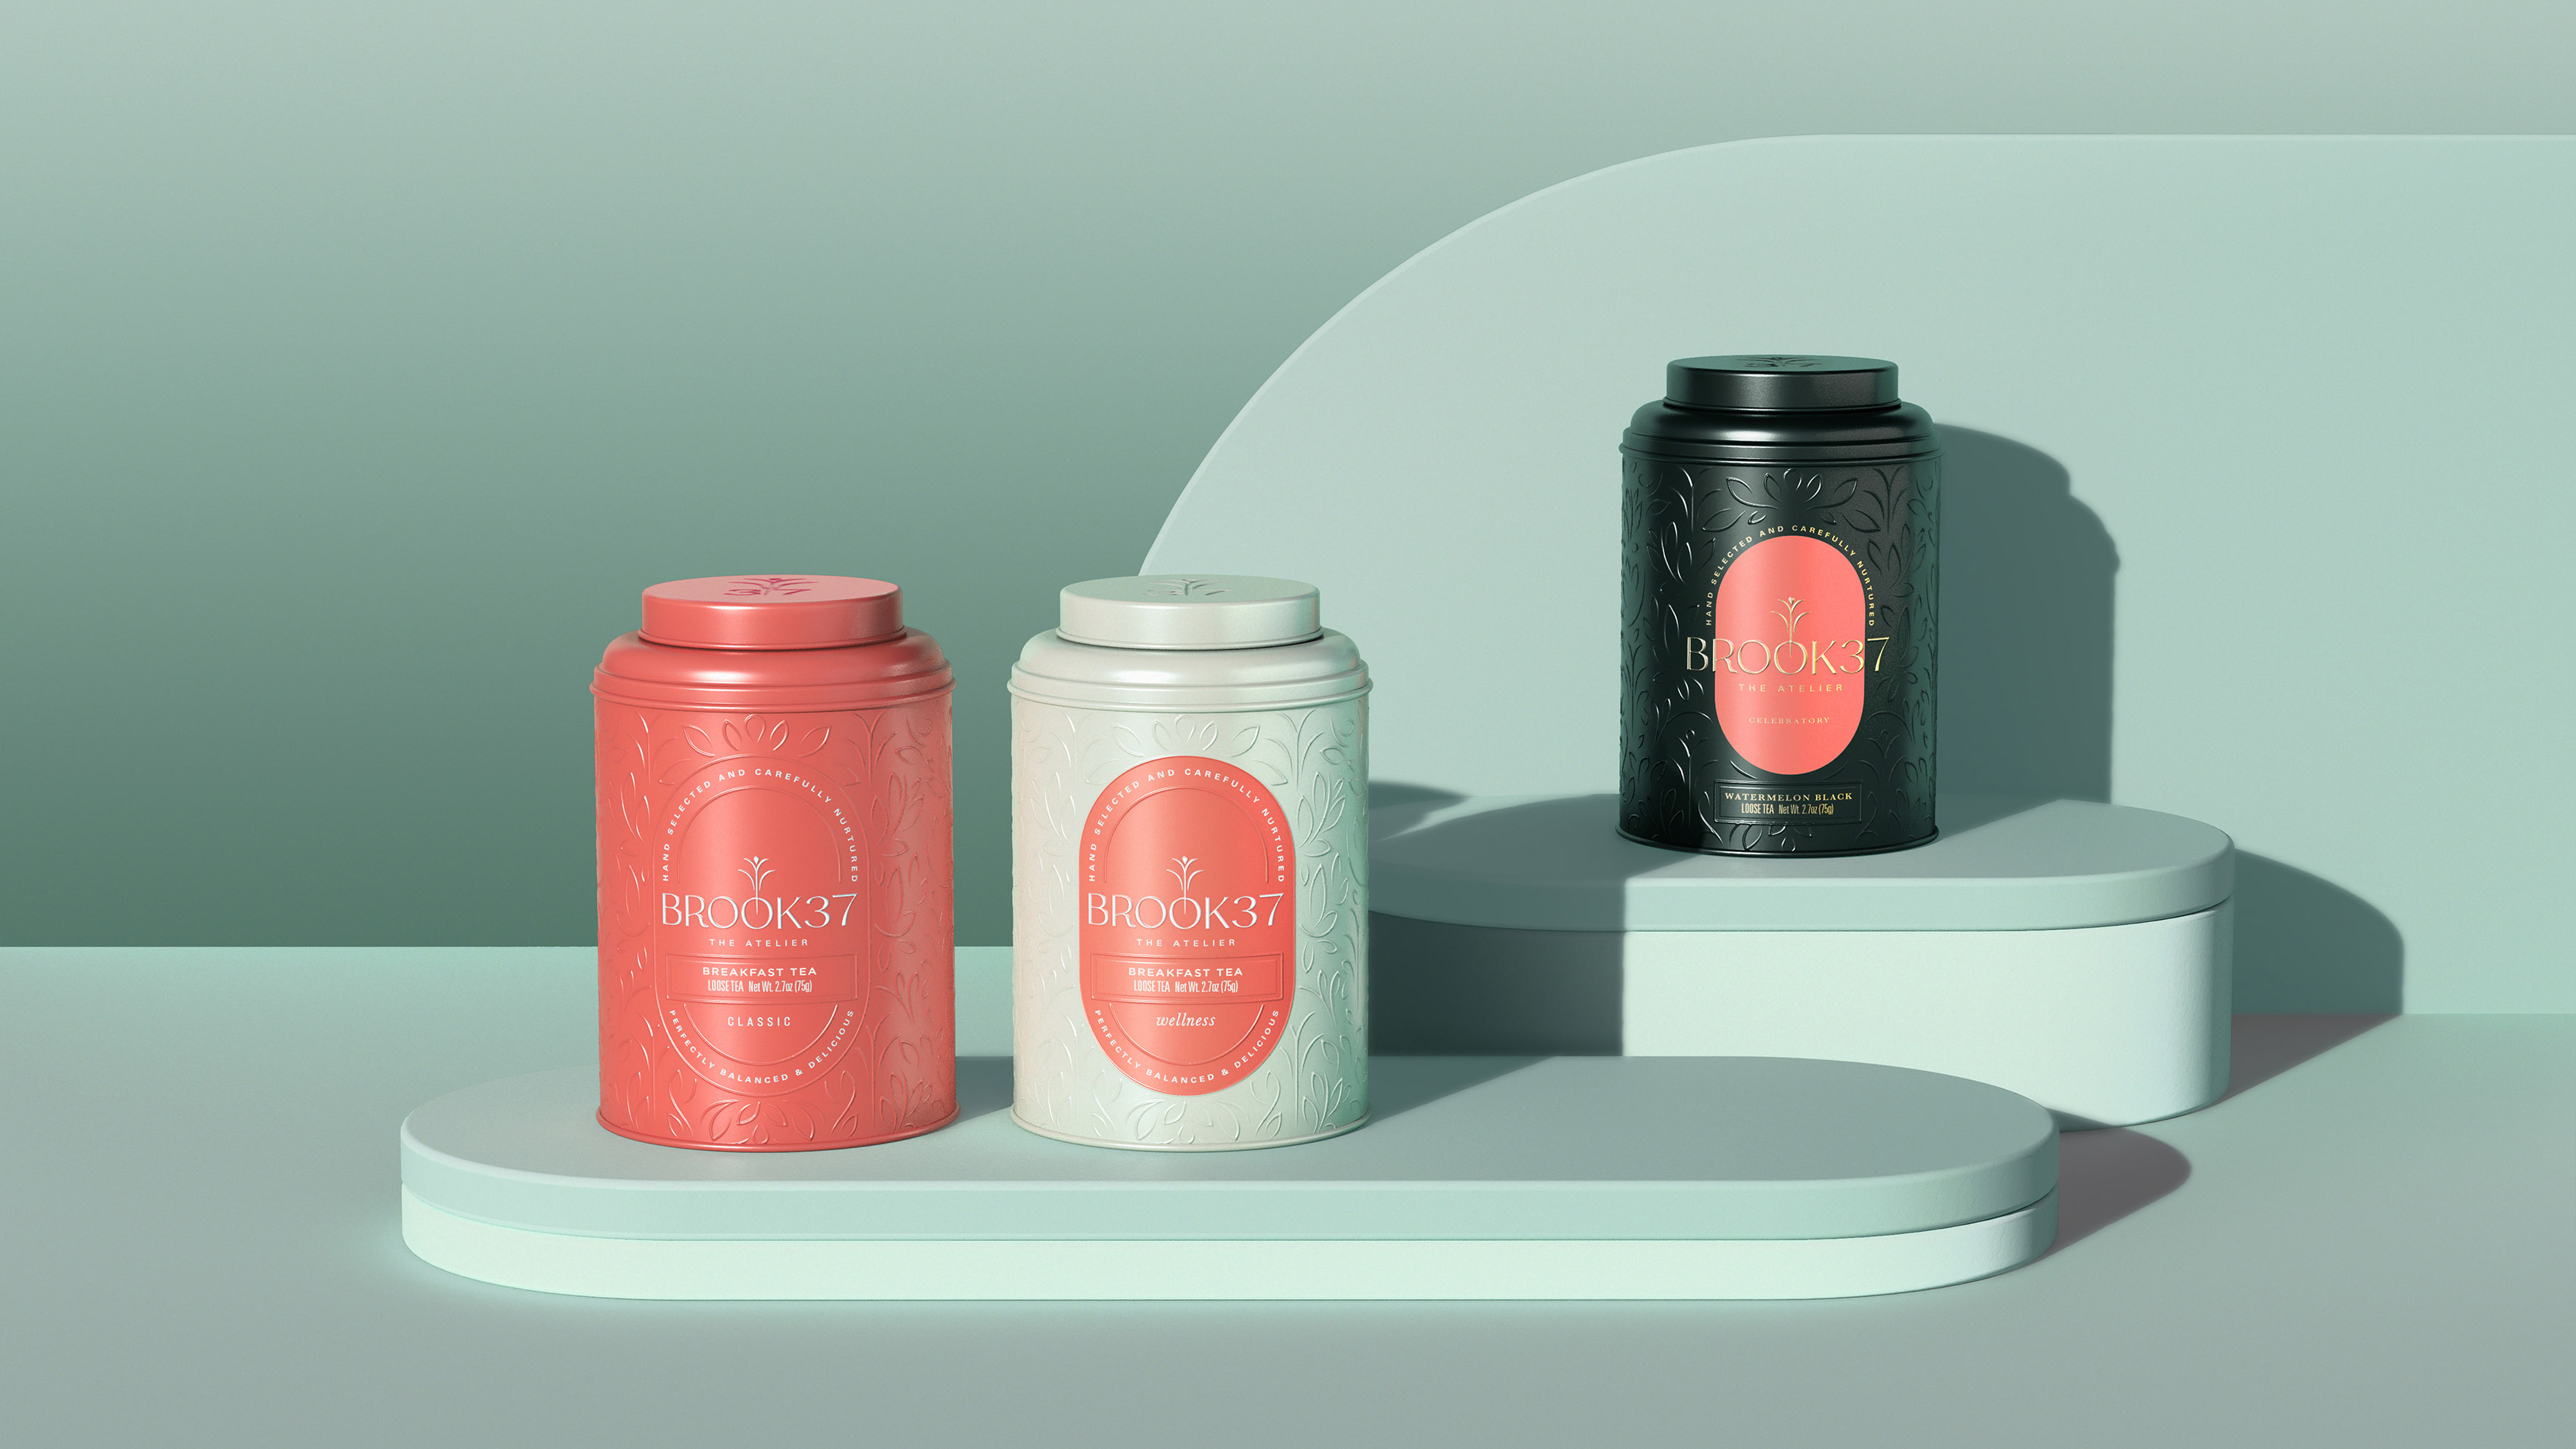 Butterfly Cannon Creates a Tea Brand Identity Worth Celebrating for New-to-world Tea ‘Atelier’, Brook37